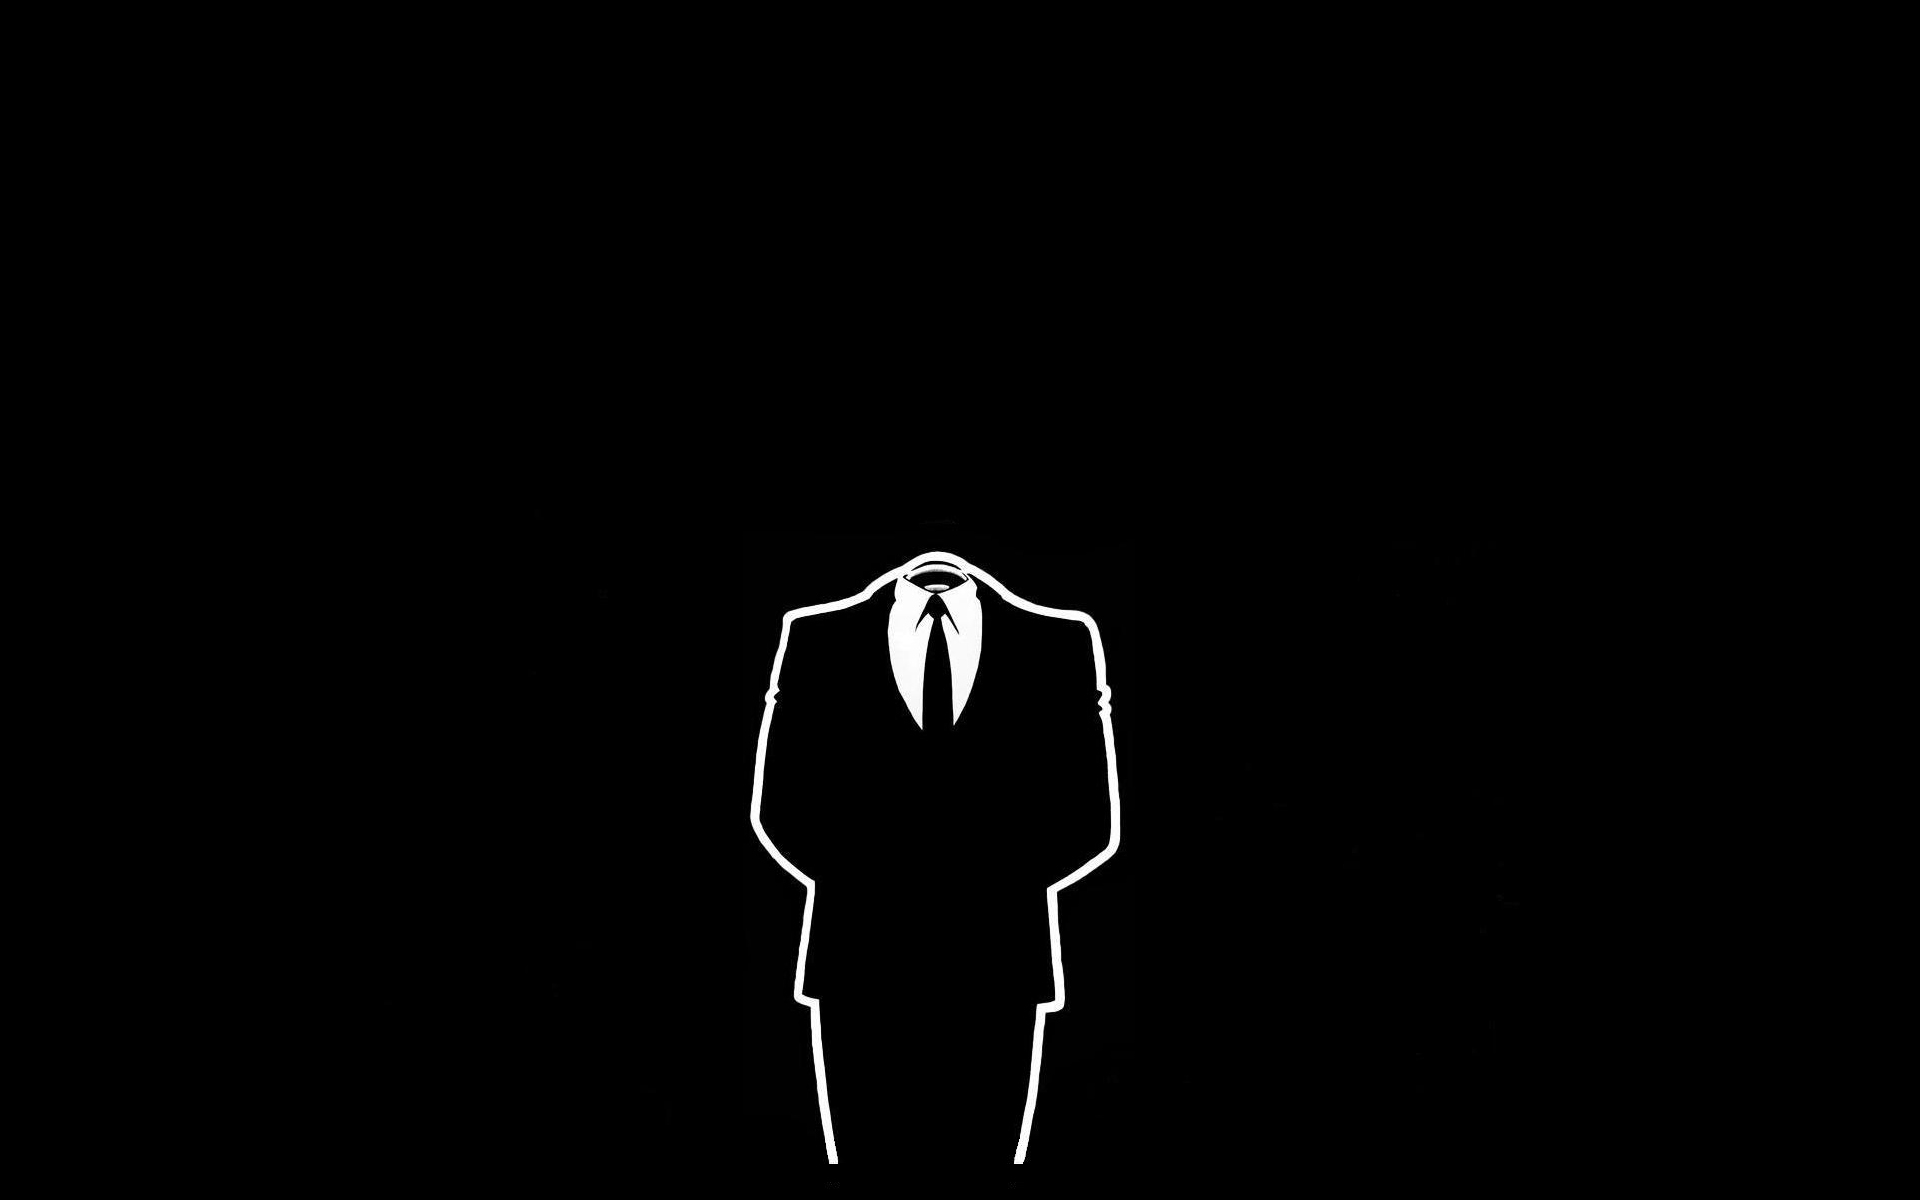 Anonymous - HD Wallpaper View, Resize and Free Download / WallpaperJam.com.